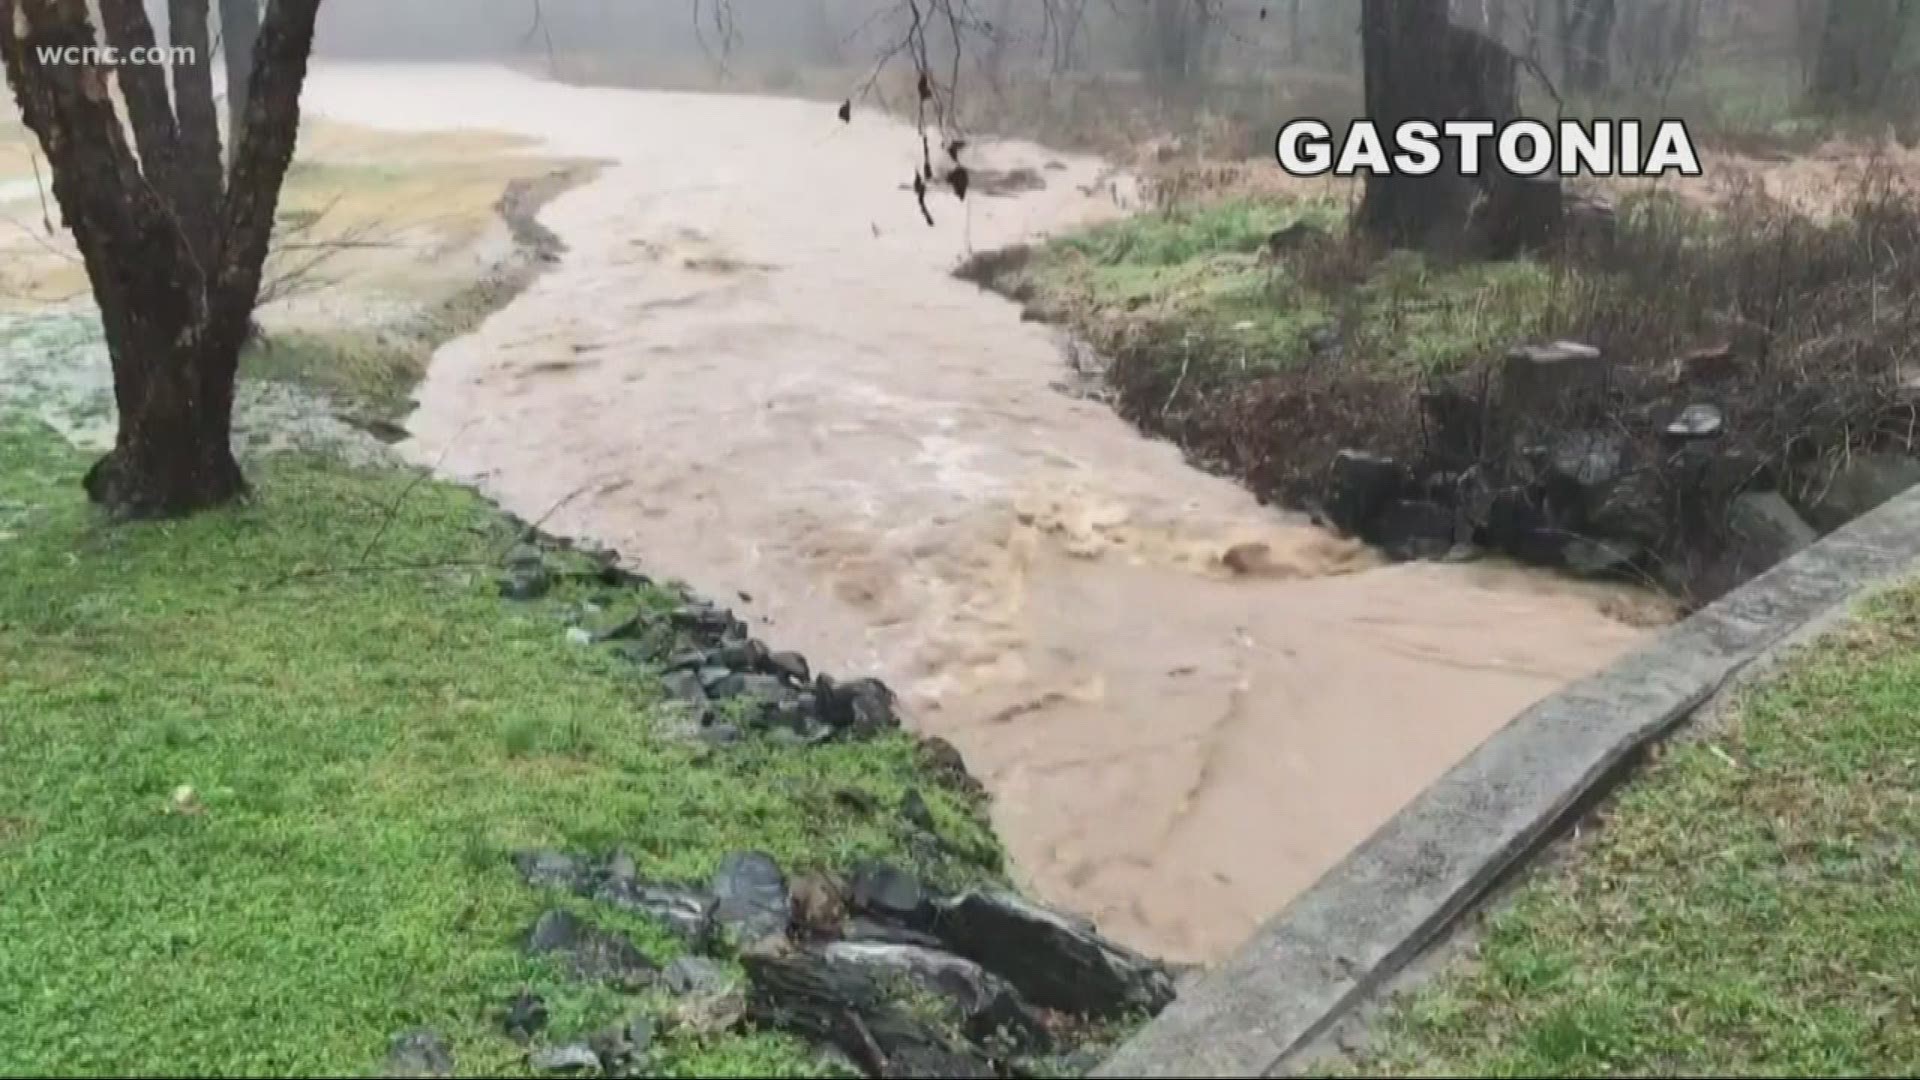 Communities across the Charlotte area saw widespread flooding from heavy rains during Thursday's severe weather.